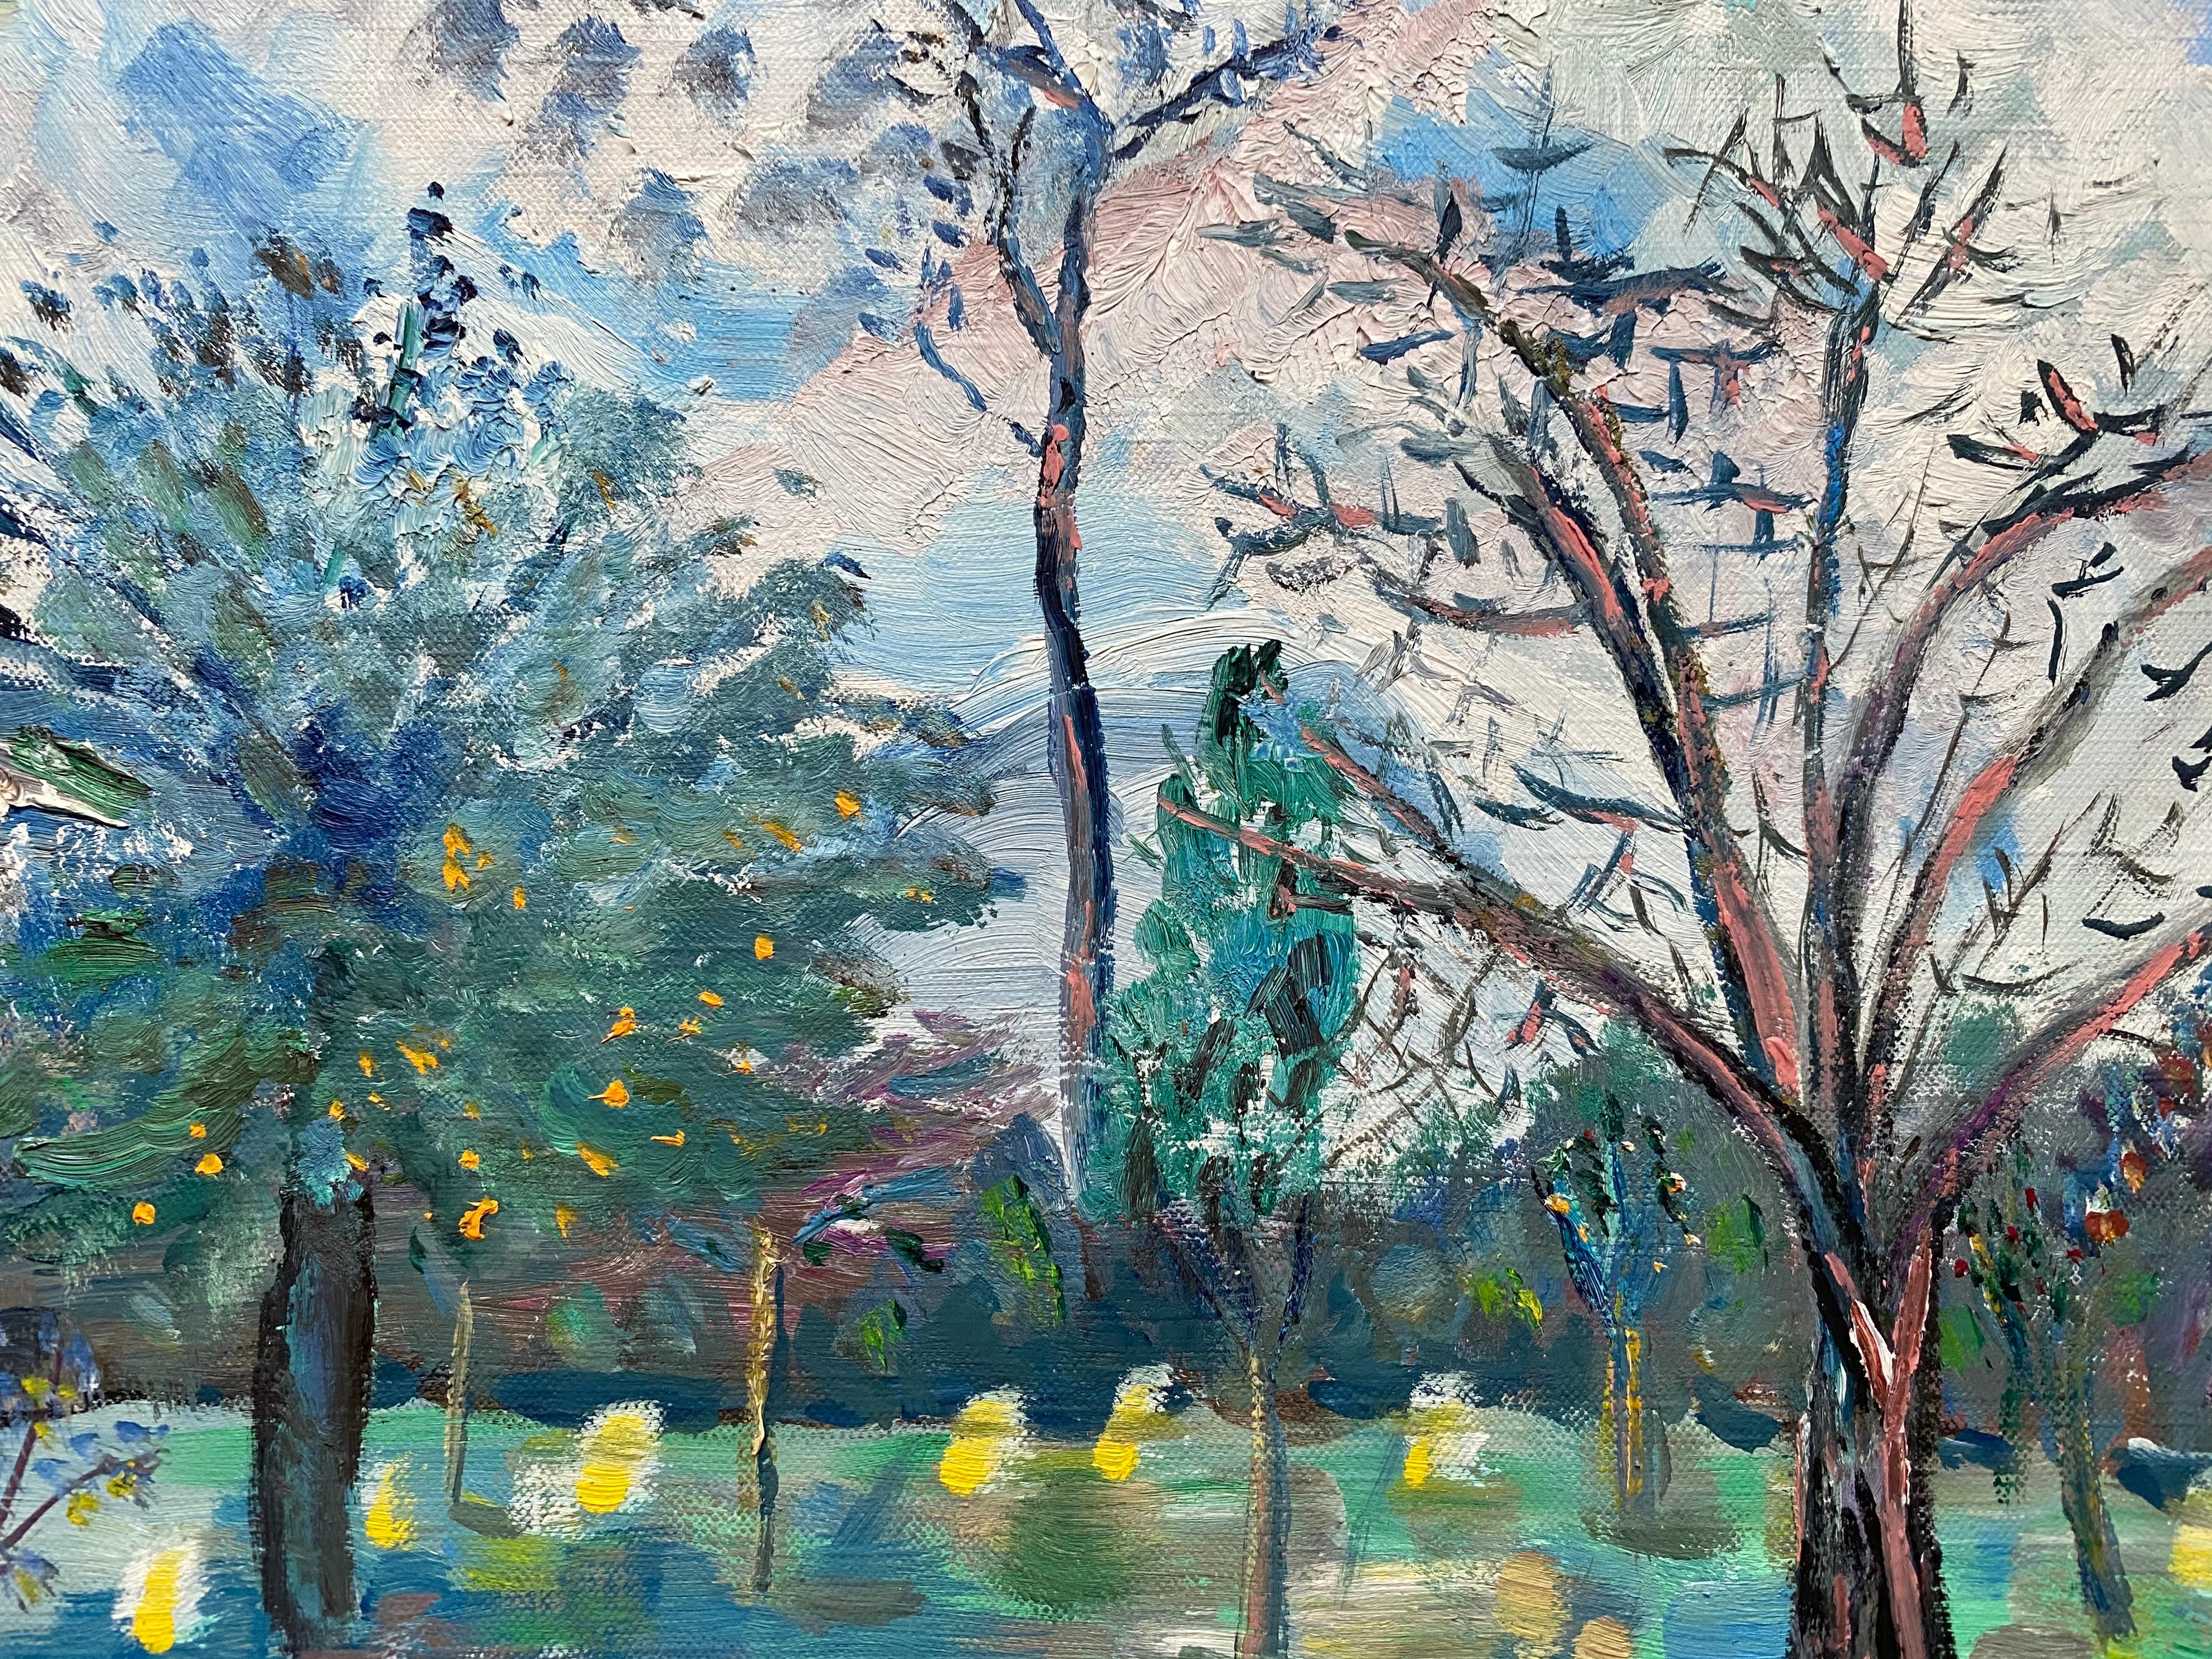 Provence Colourful Trees, French Original Oil Painting
French schooled artist, 20th Century
Oil painting on thin card/paper, unframed
Card size: 15 x 18 inches

Delightful French Impressionist oil painting, depicting the far view of little fishing